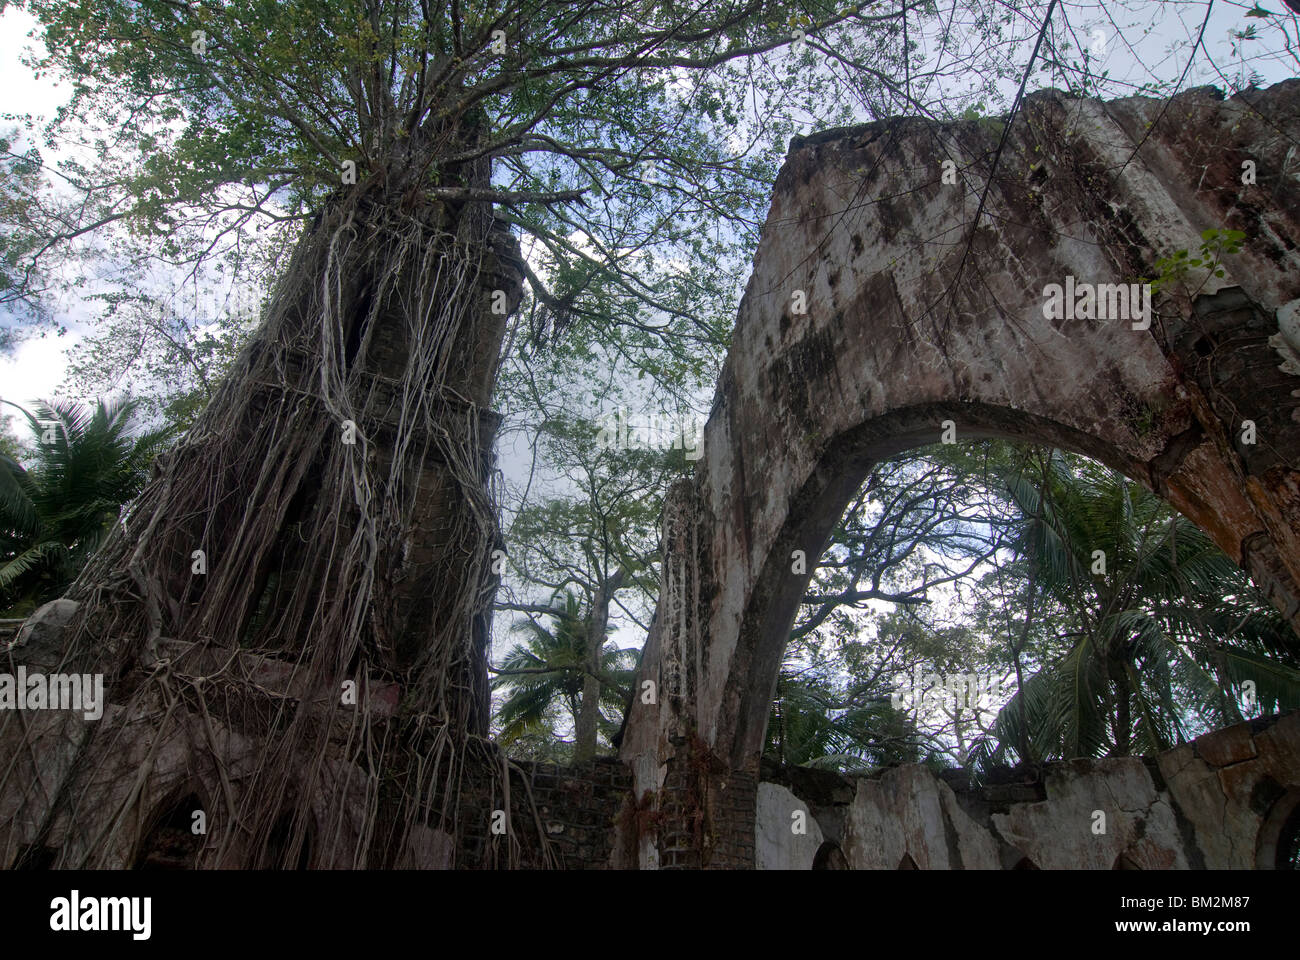 Overgrown destroyed church on Ross Island, formerly known as the Paris of the Indian Ocean, Andaman Islands, India Stock Photo